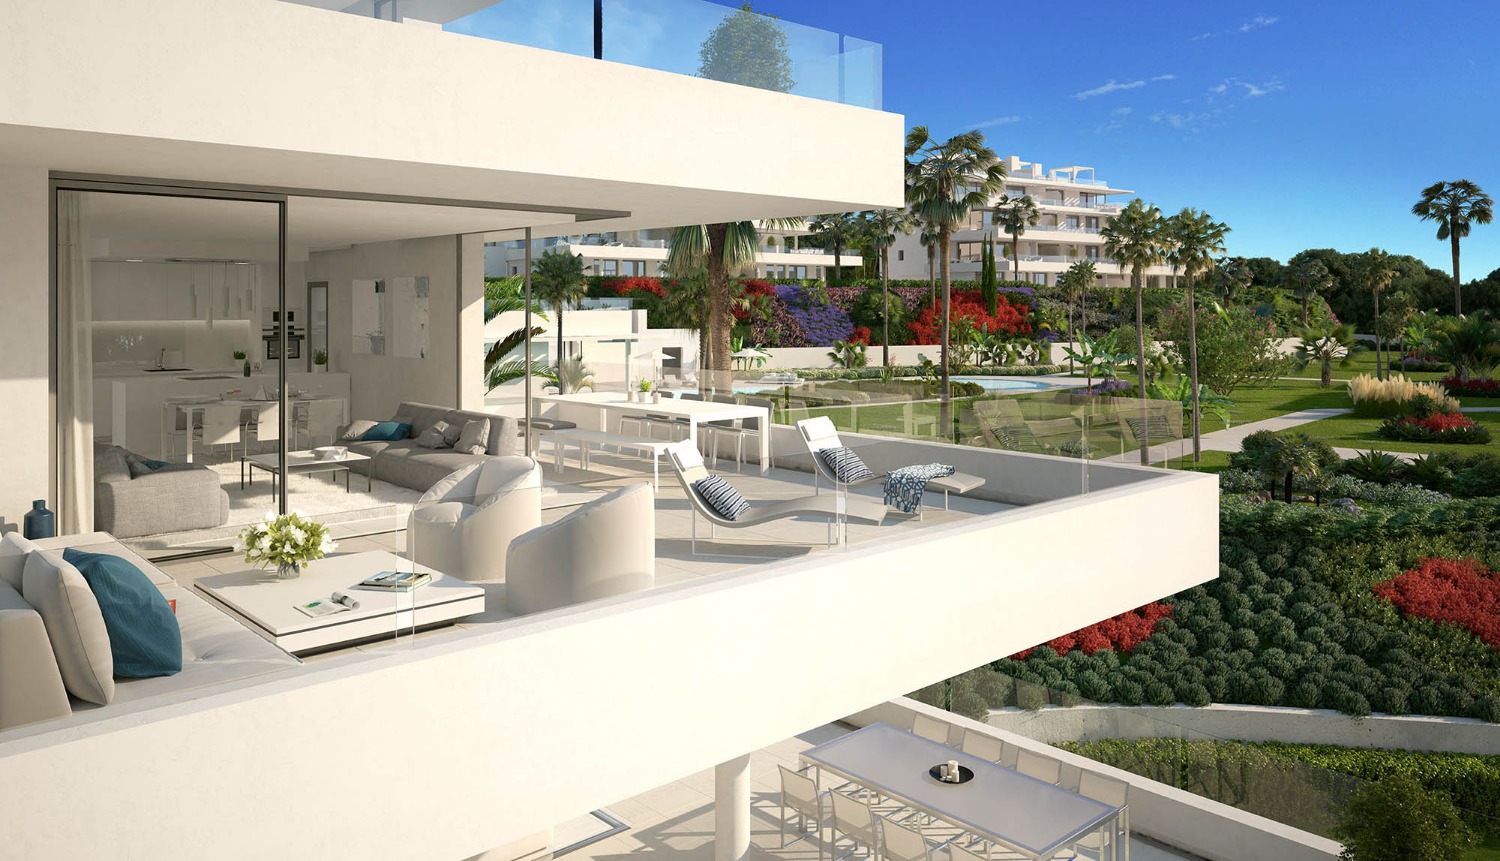 Penthouse with 4 bedrooms, 3 bathrooms, 4 garages and 1 store room.